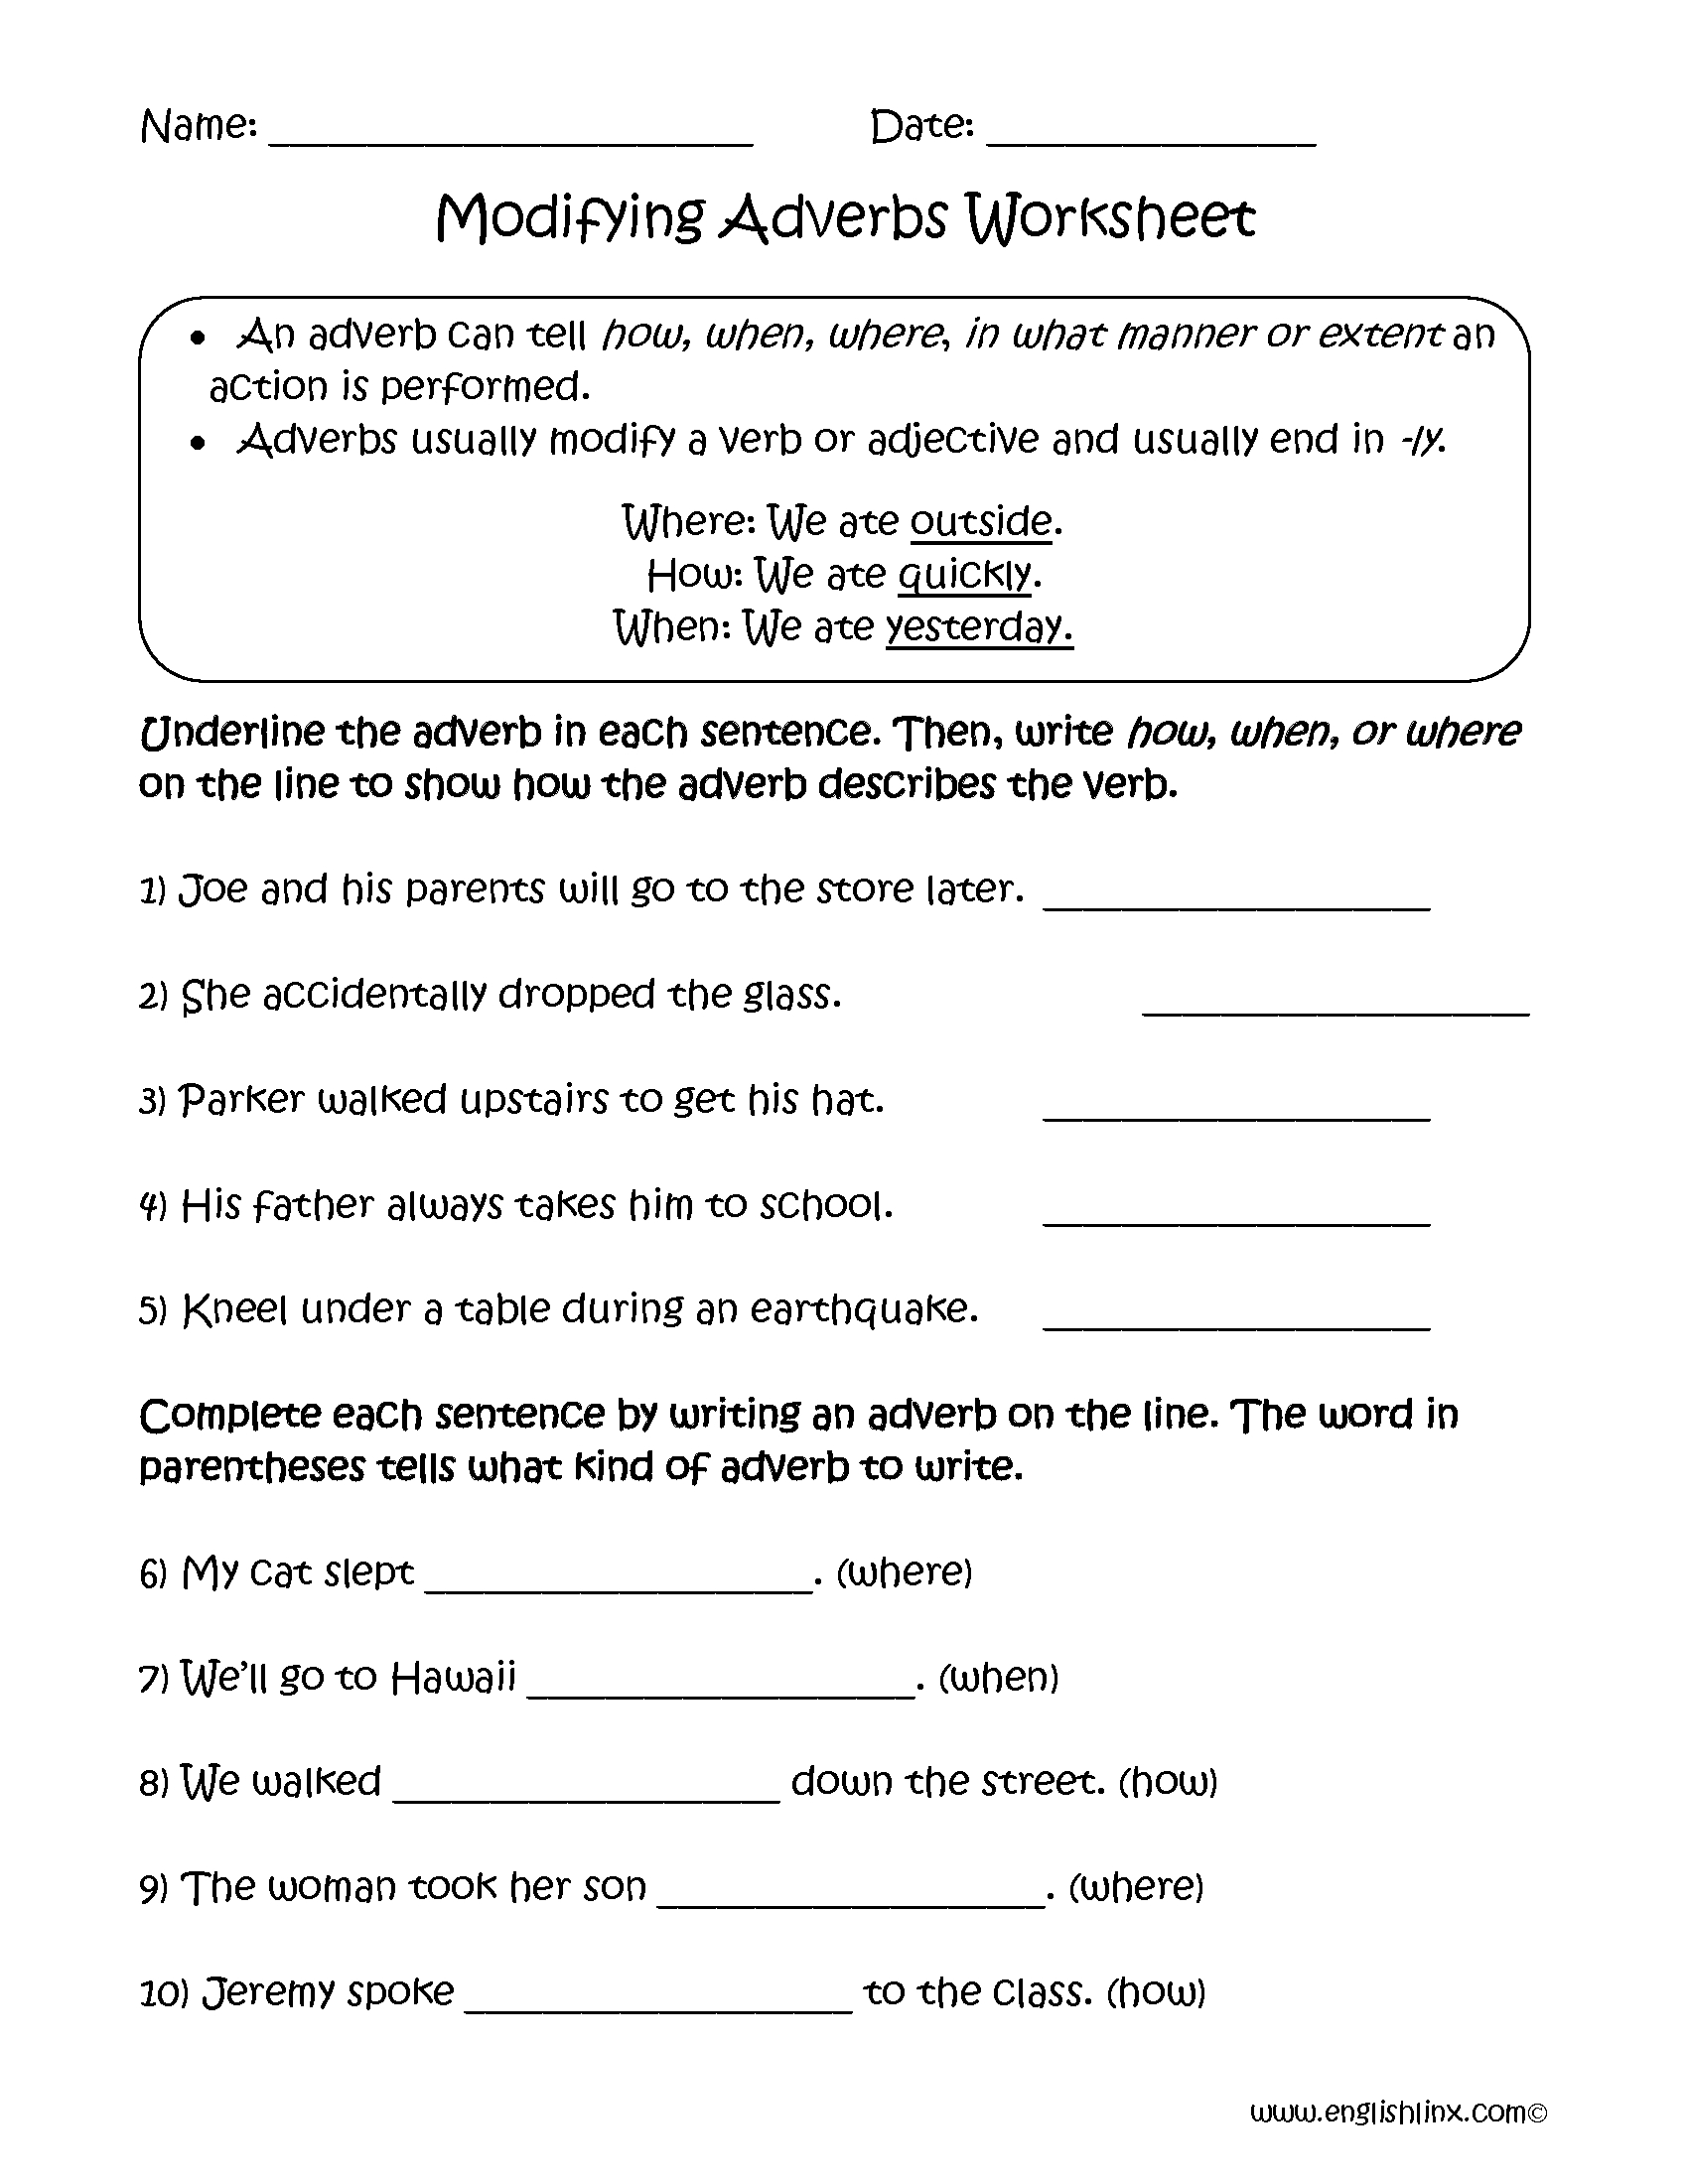 adverbs-of-frequency-worksheet-adverbs-of-frequency-adverbs-english-grammar-worksheets